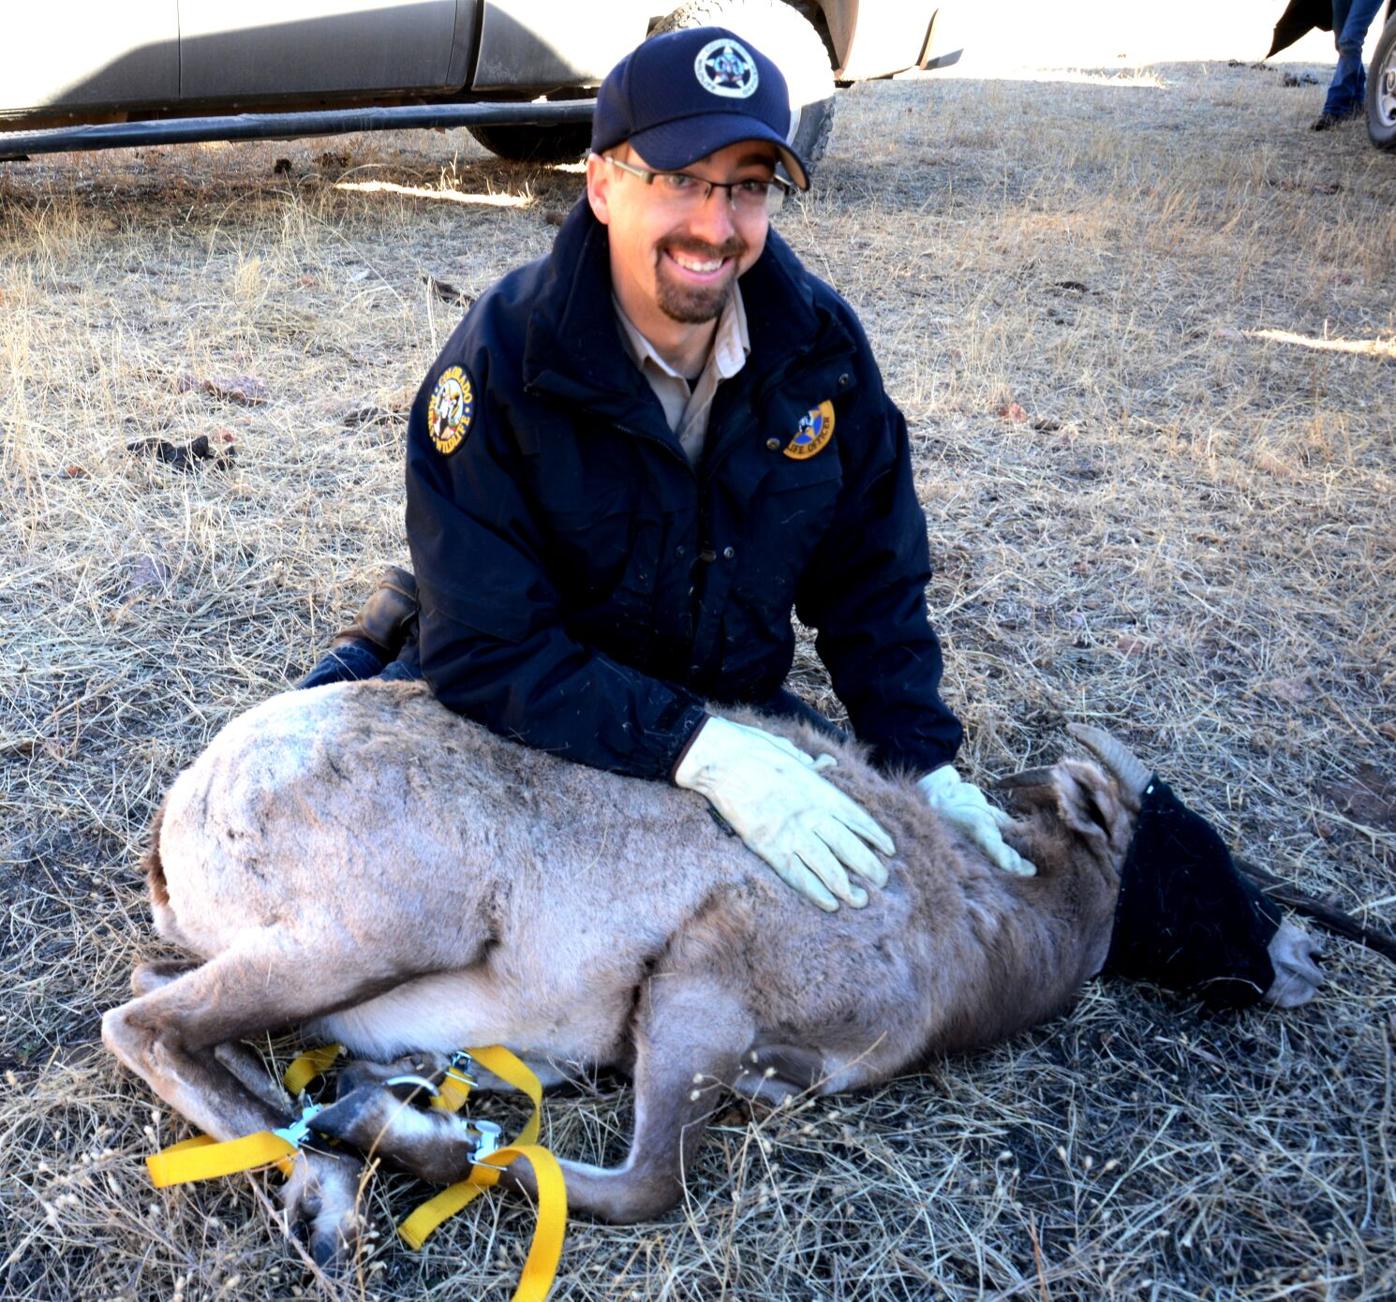 Meet your new Colorado Parks and Wildlife officer Travis Sauder